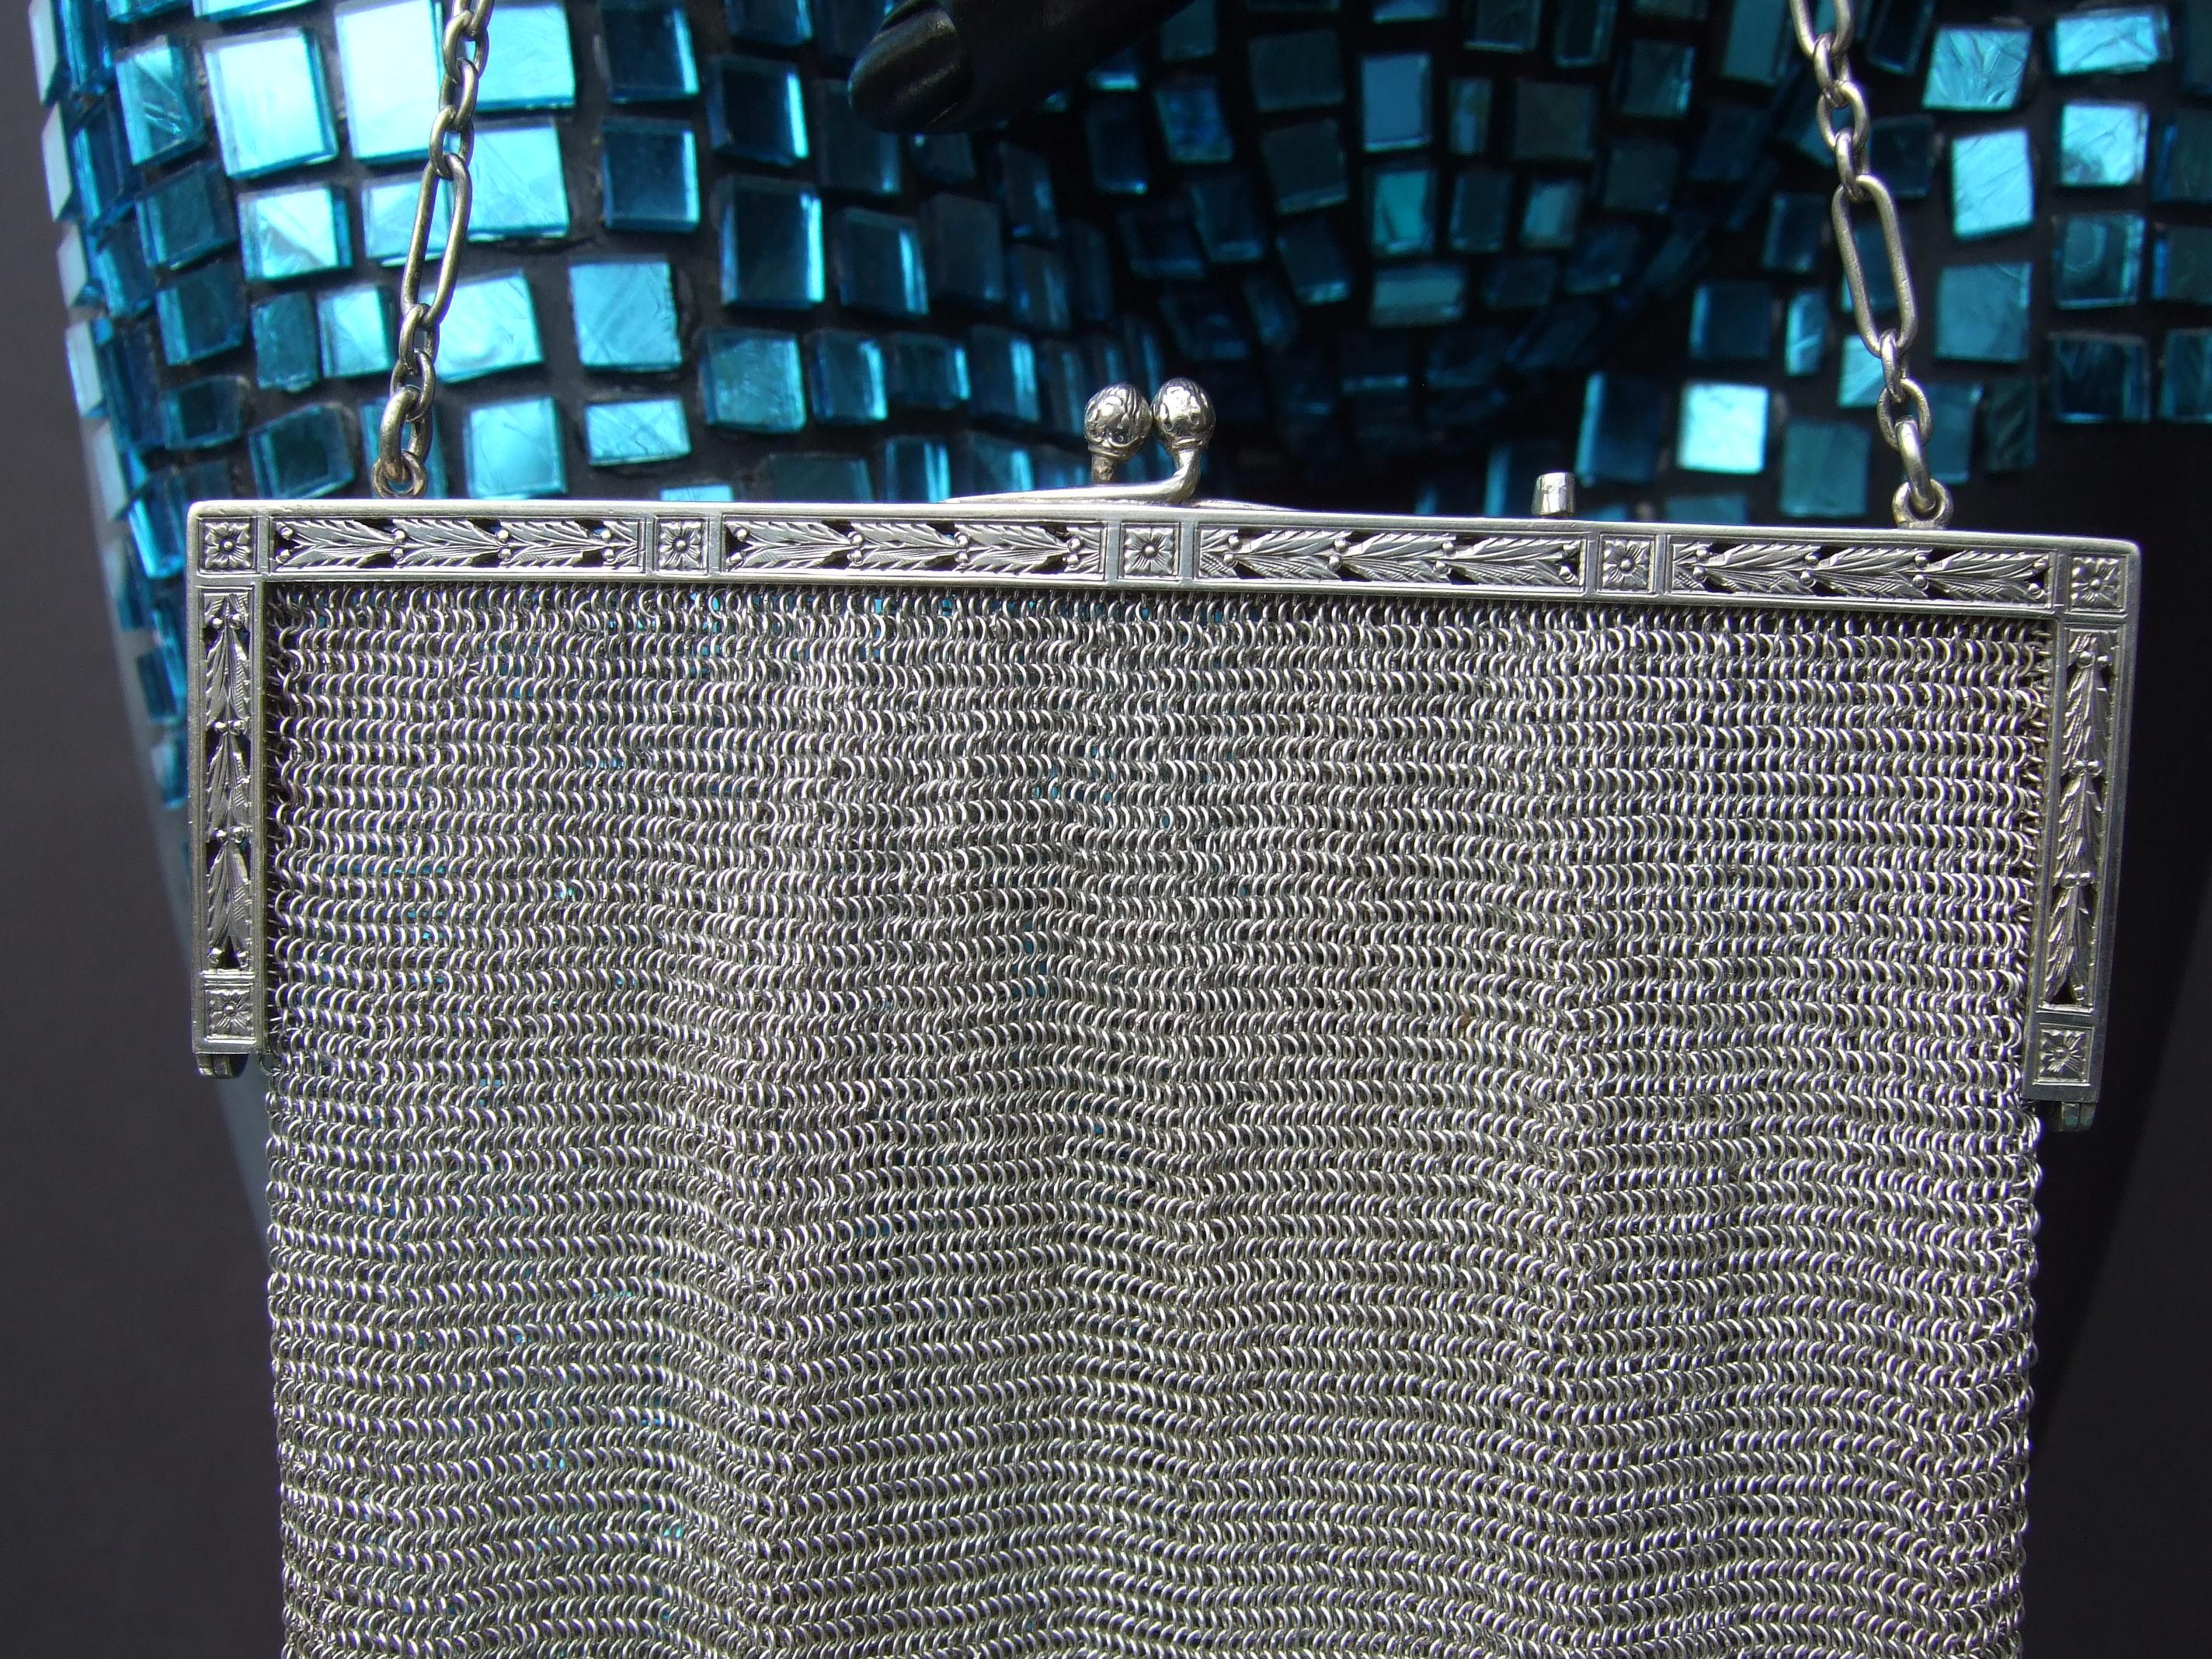 Tiffany & Co. Rare Sterling Silver Chain Mail Evening Bag c 1910 1